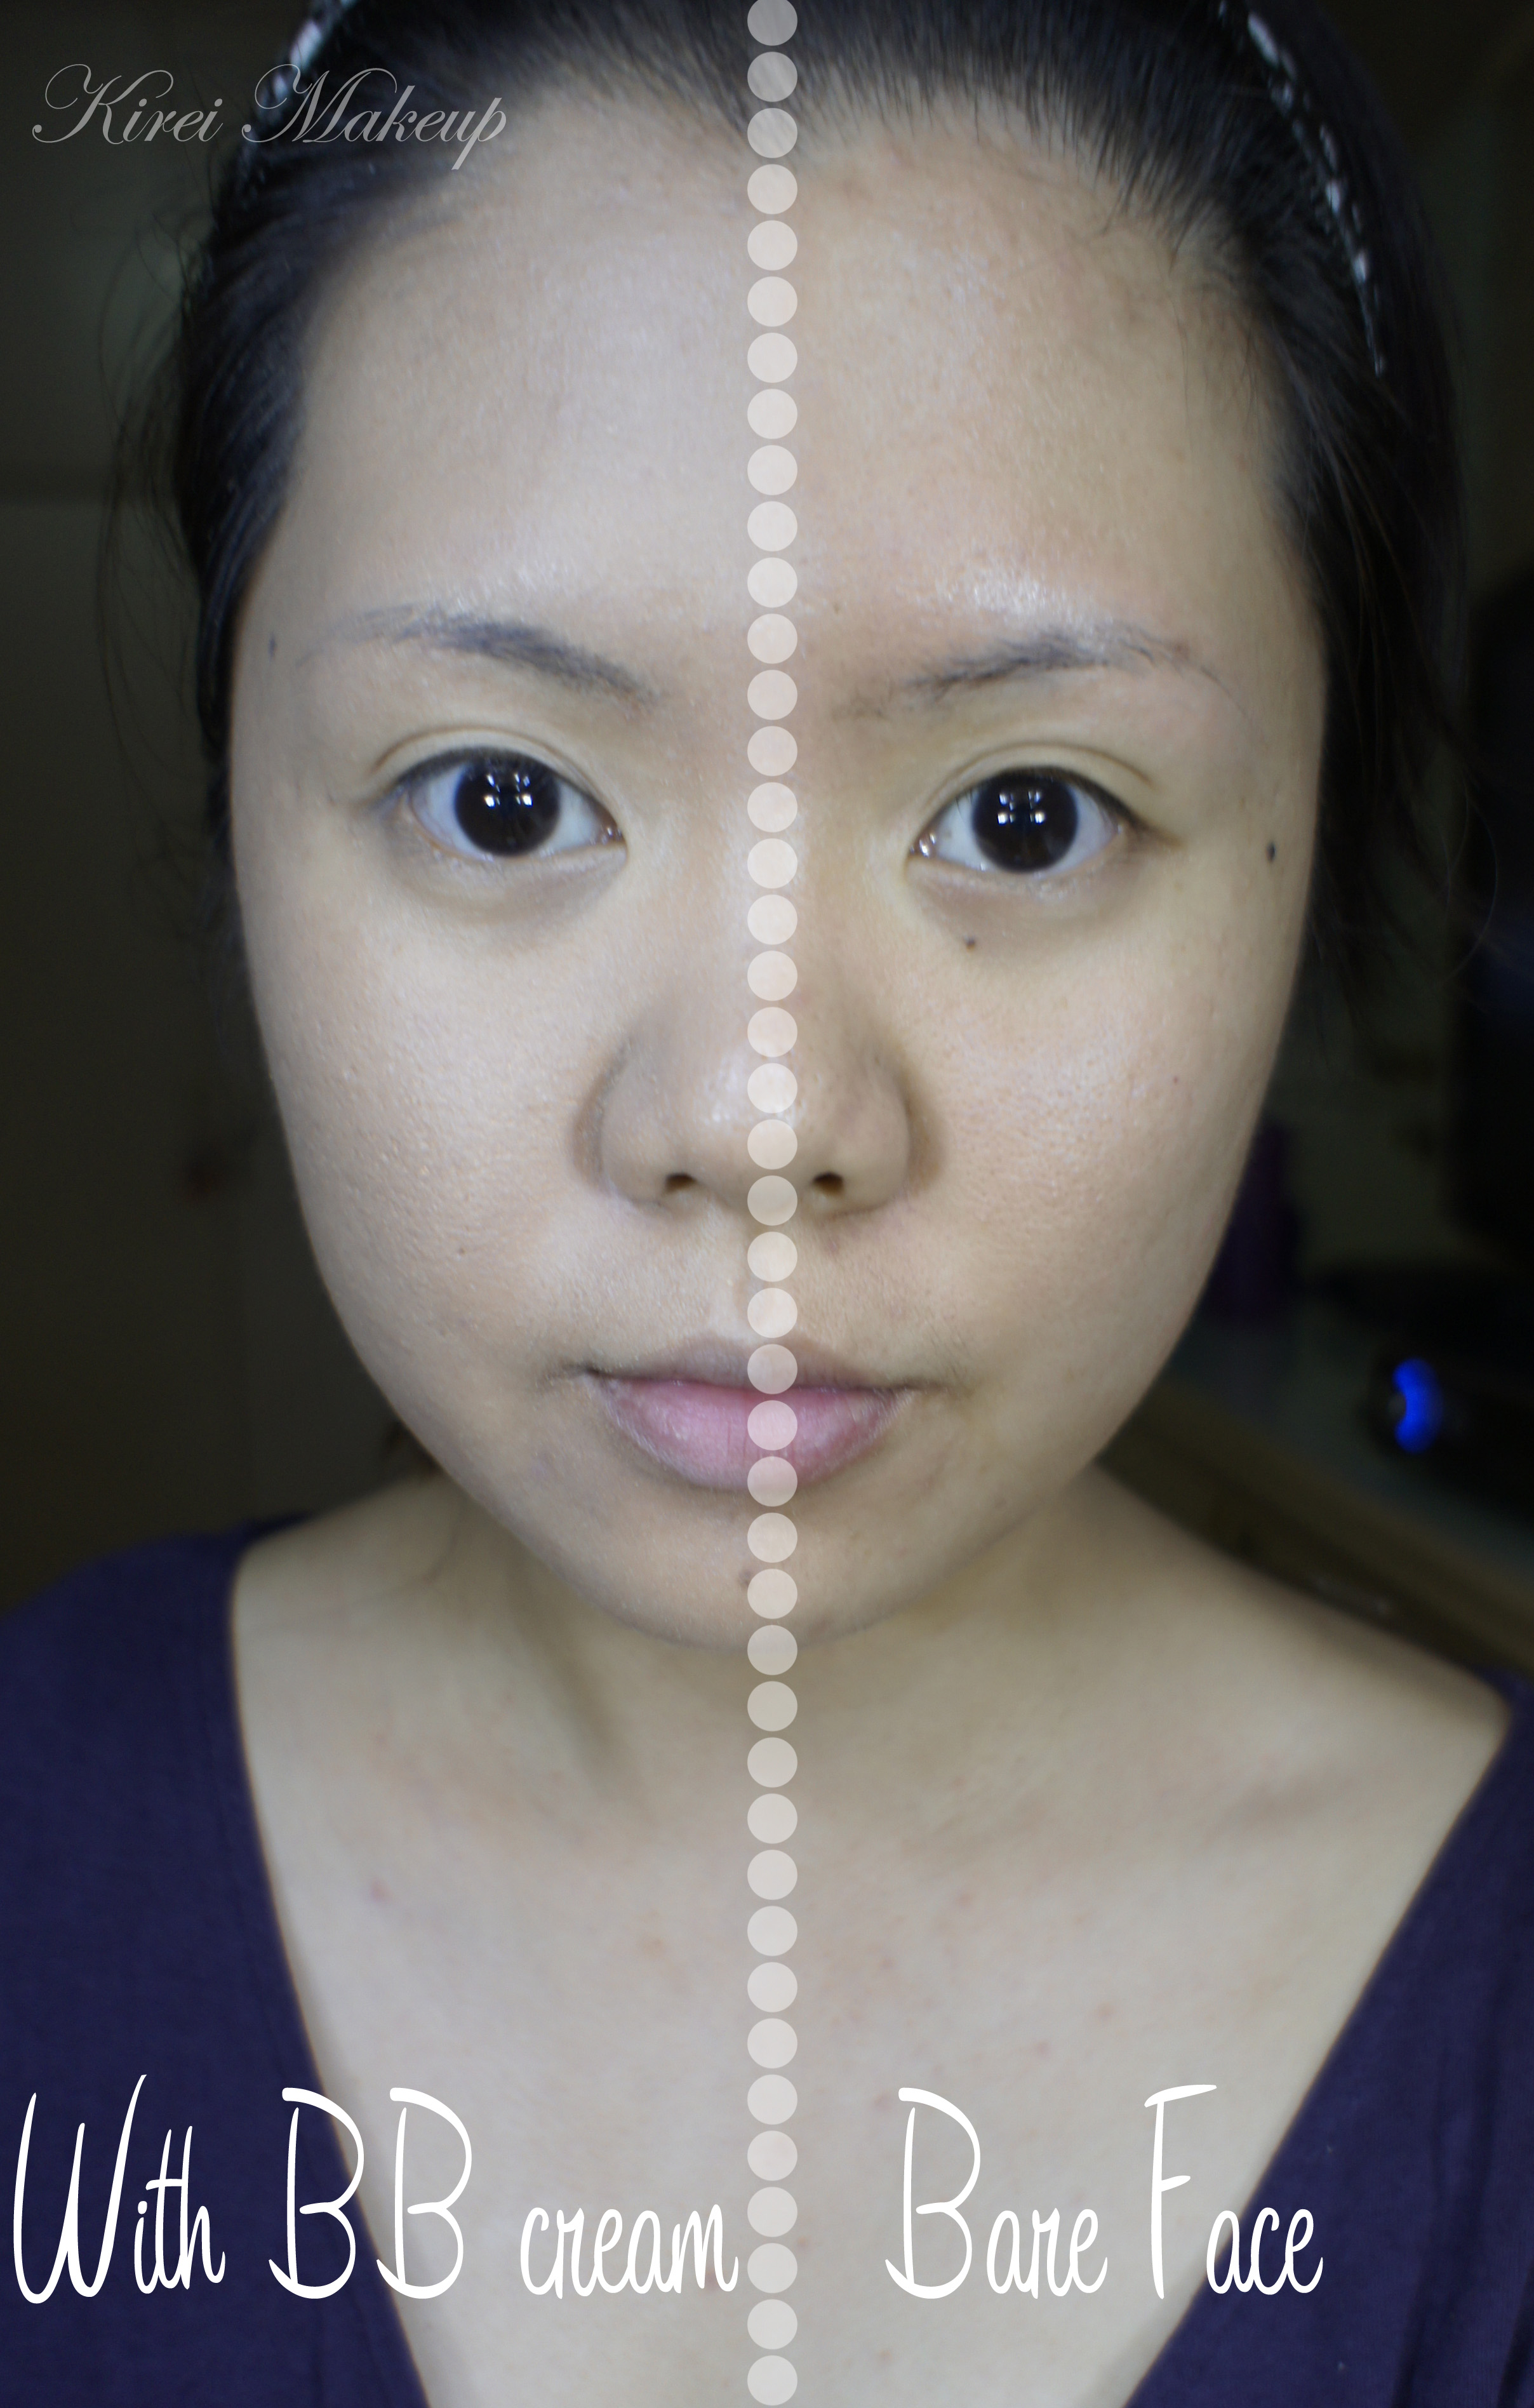 BB Cream vs. CC Cream: Here's the difference. Both offer makeup